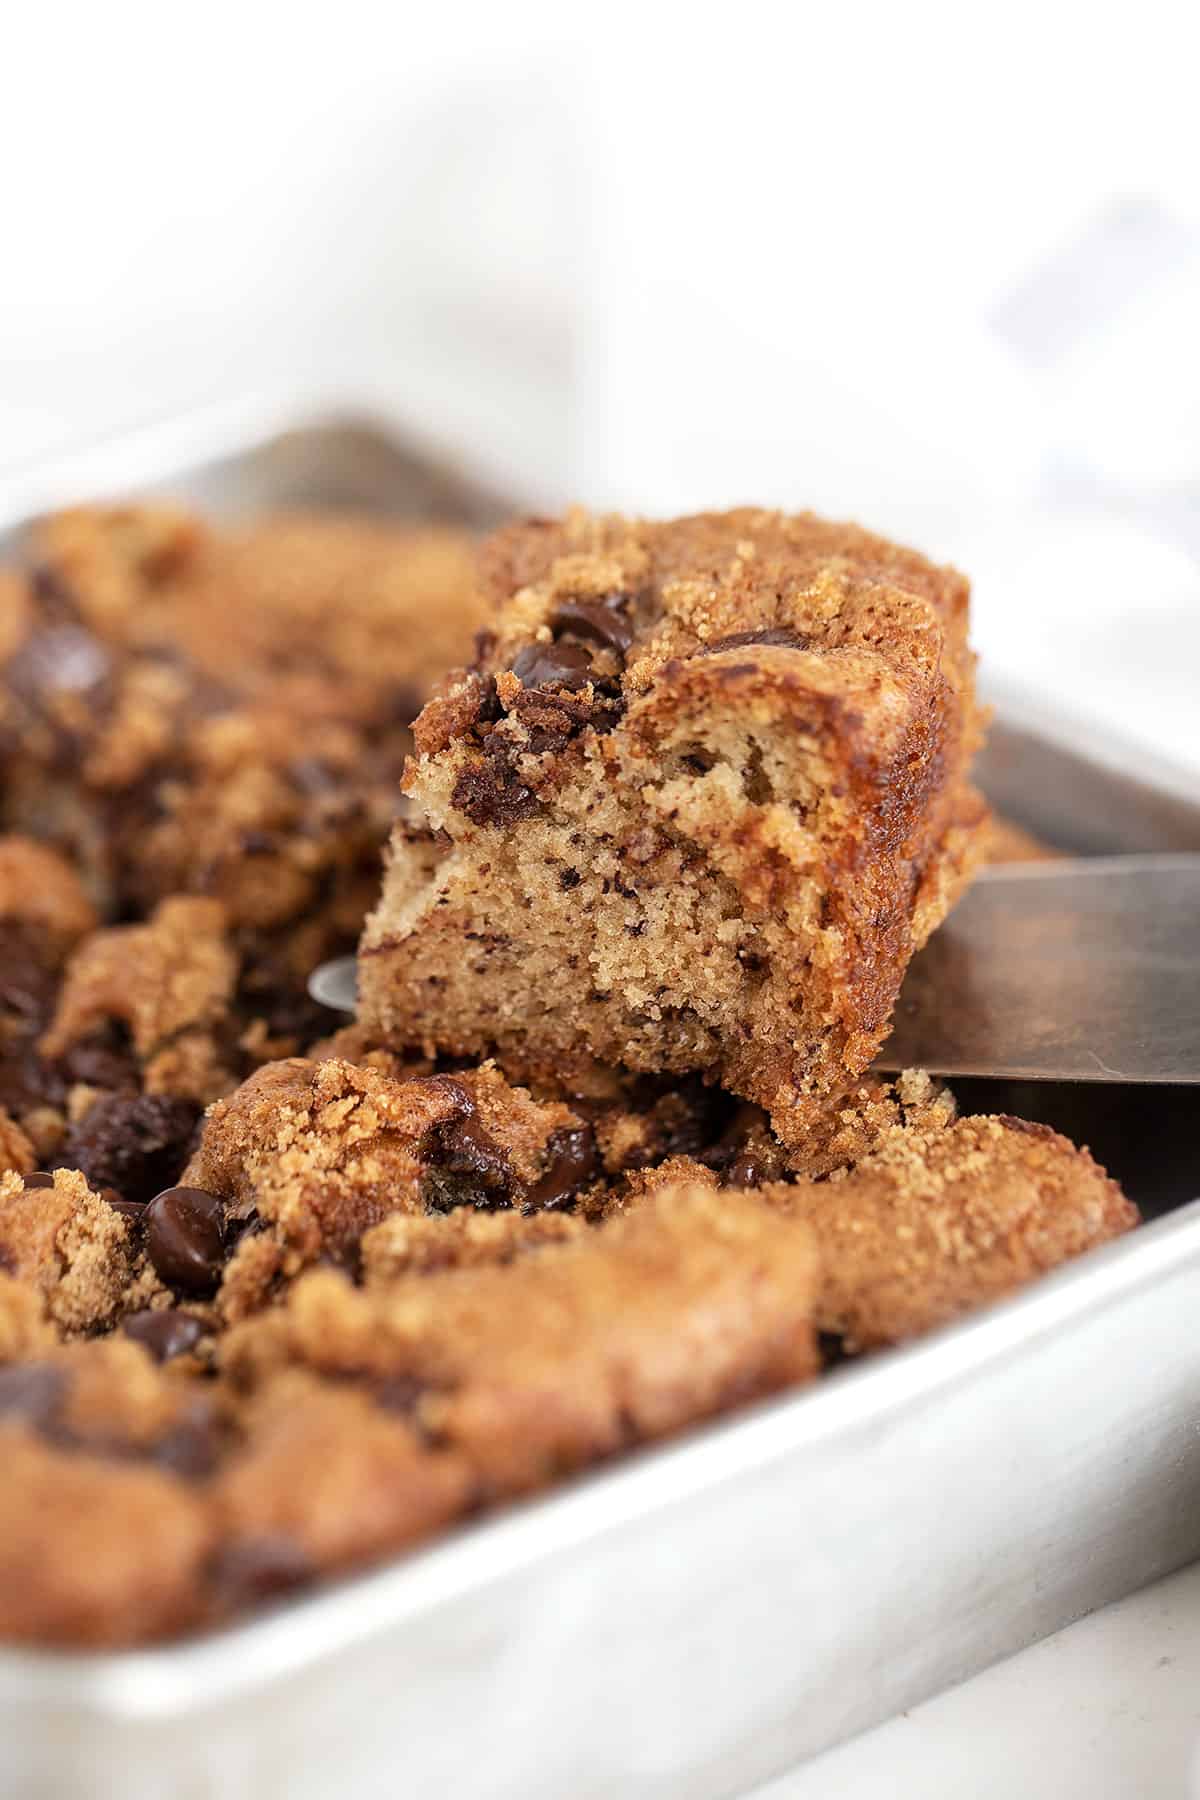 banana chocolate chip snack cake in pan with slice out